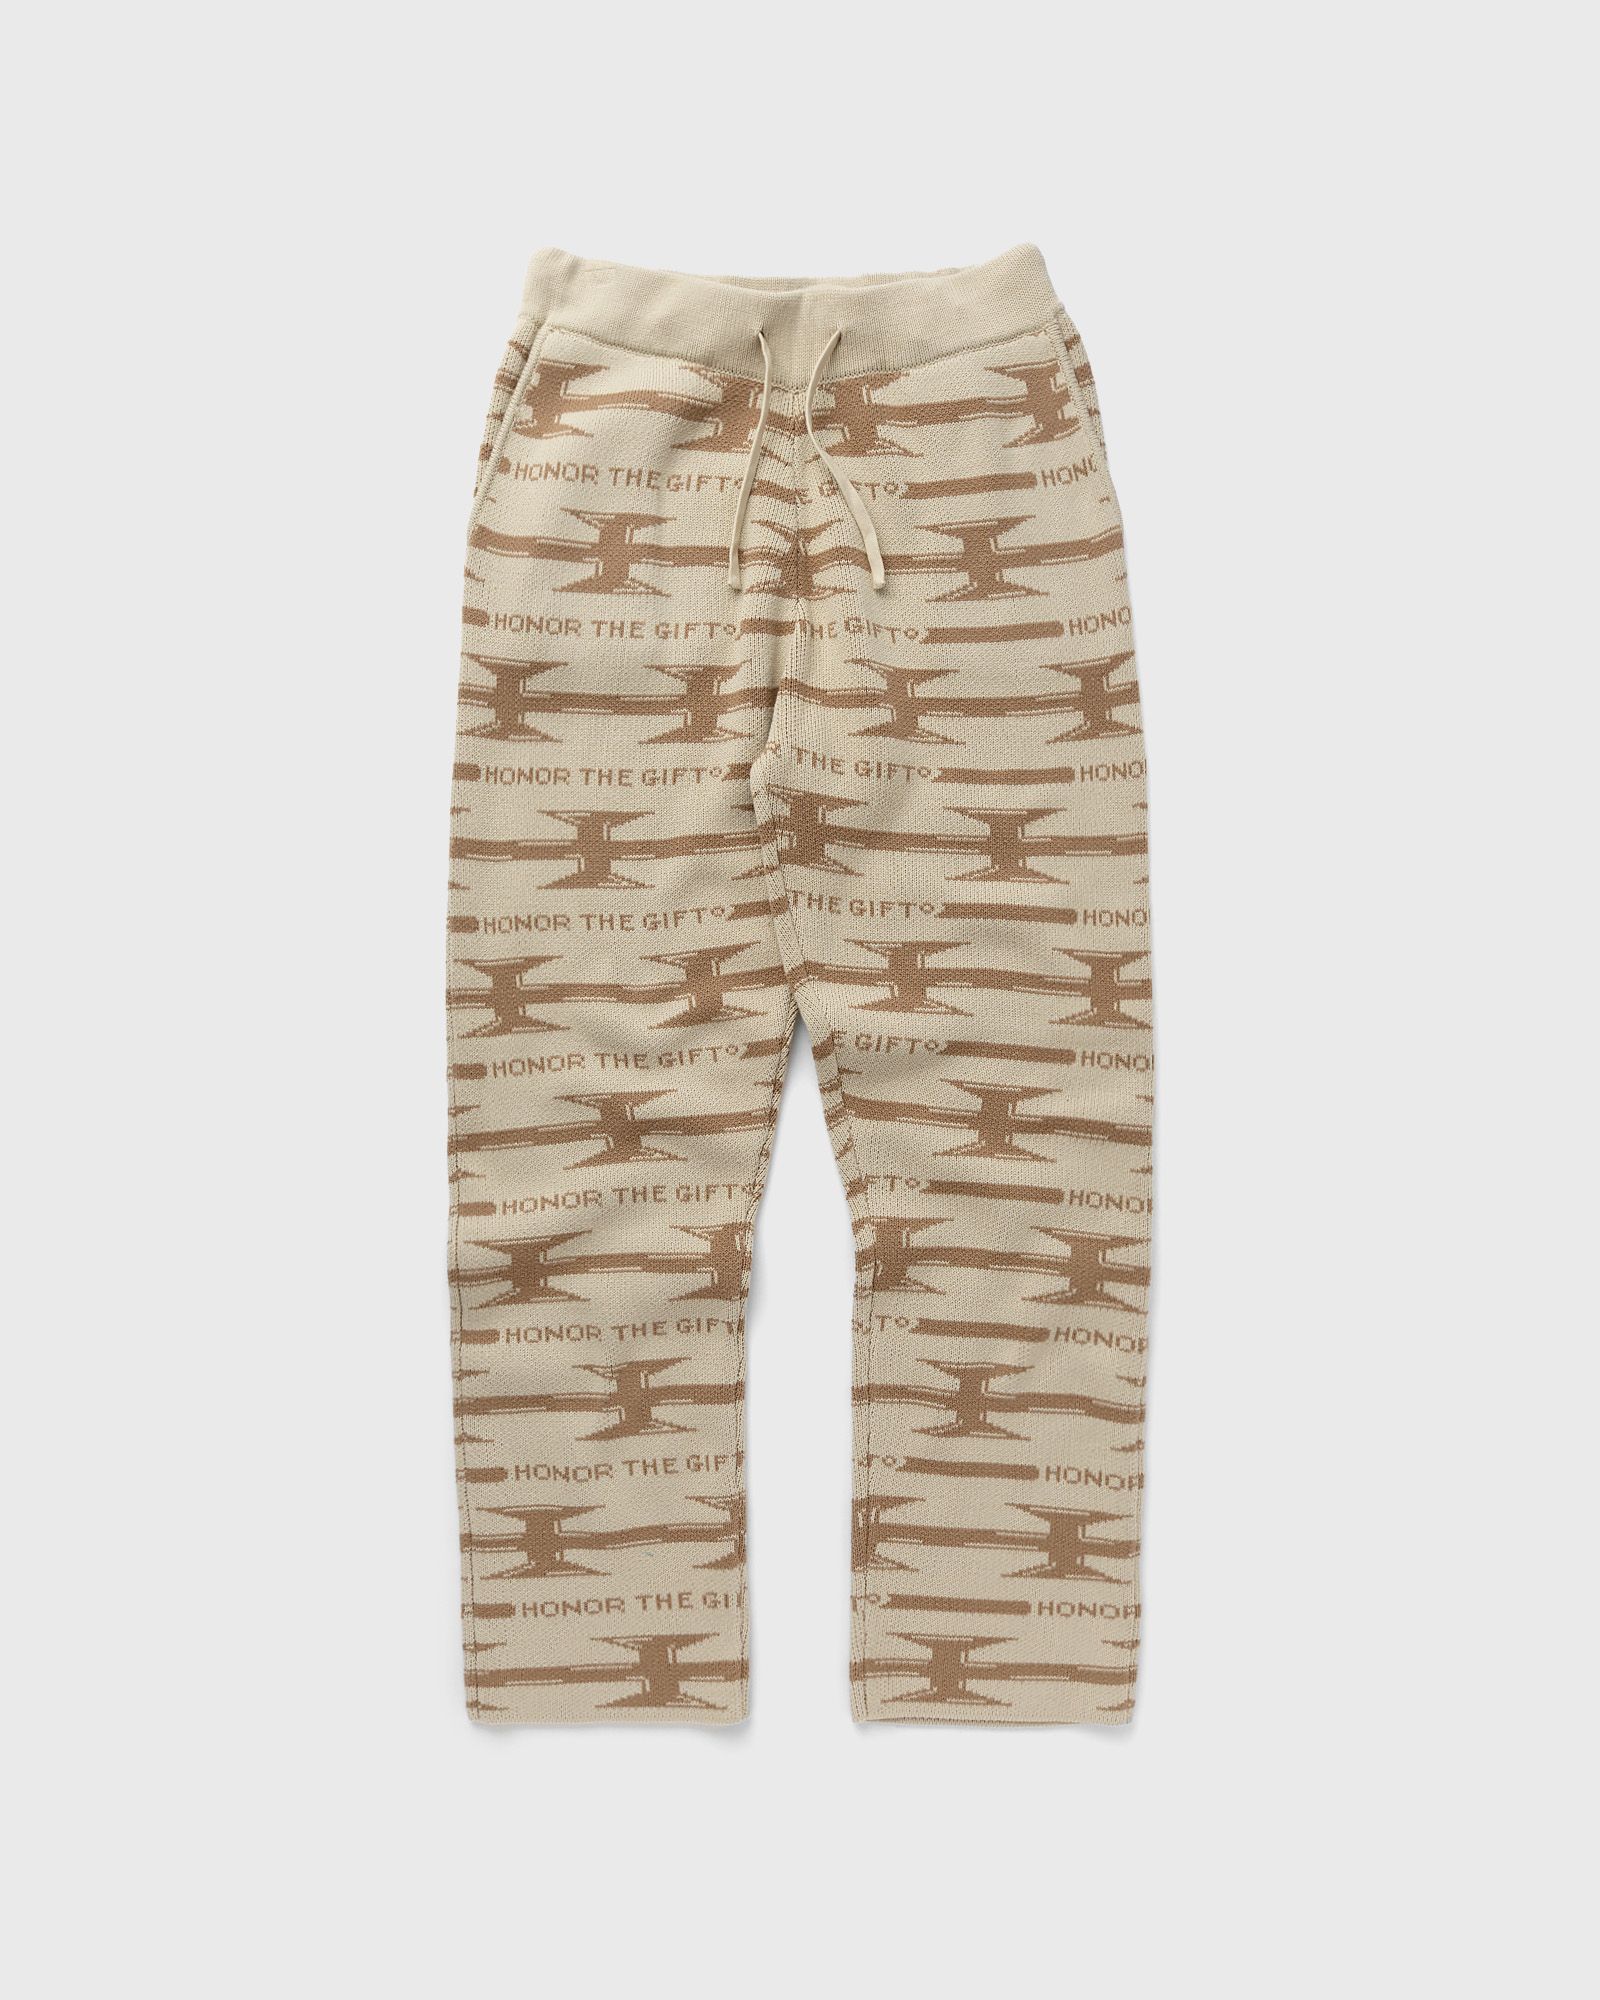 Honor The Gift - h wire knit pant men sweatpants beige in größe:xl